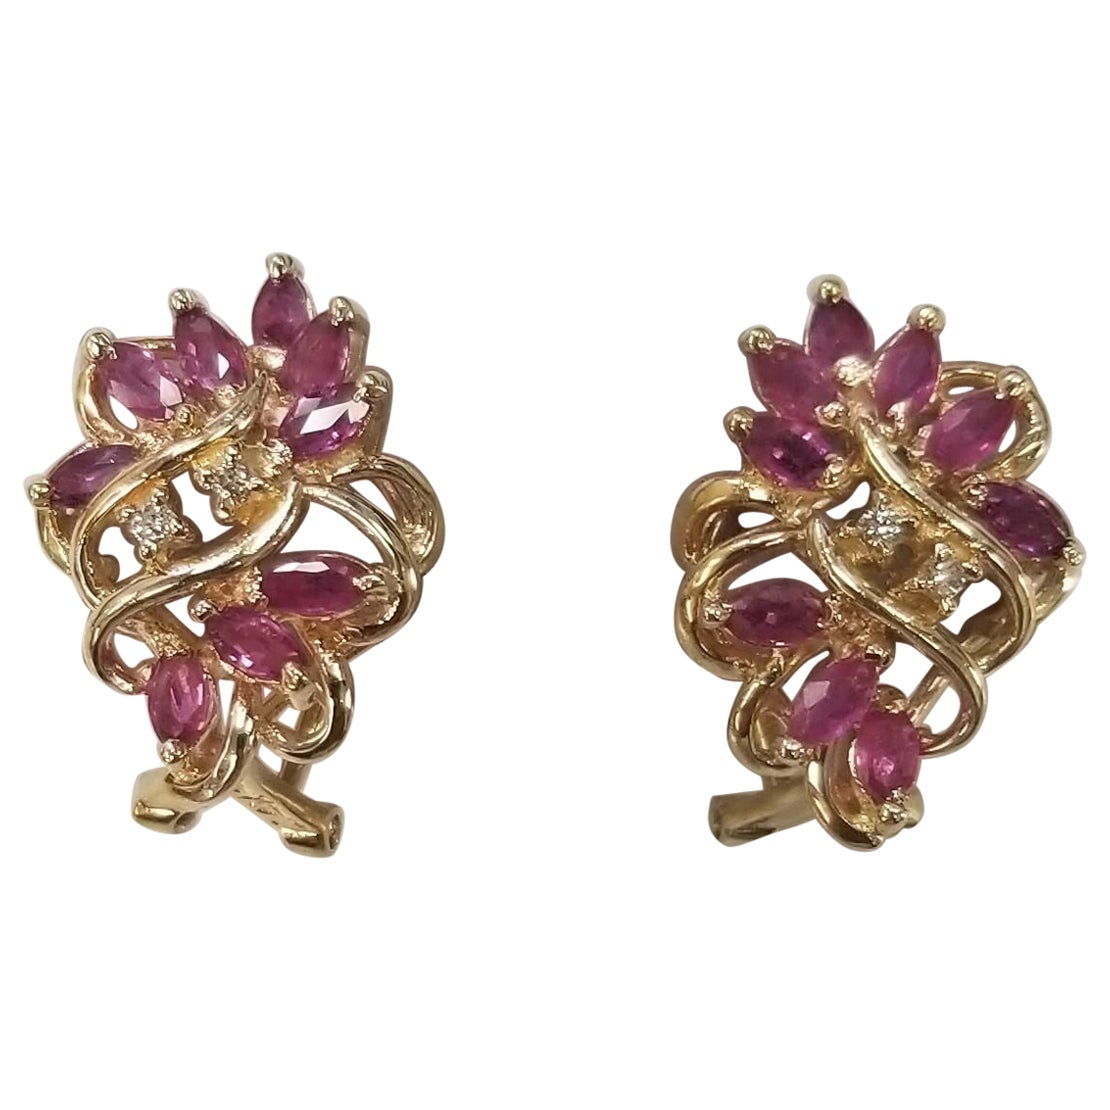 14k Yellow Gold Ruby and Diamond Cluster Earrings